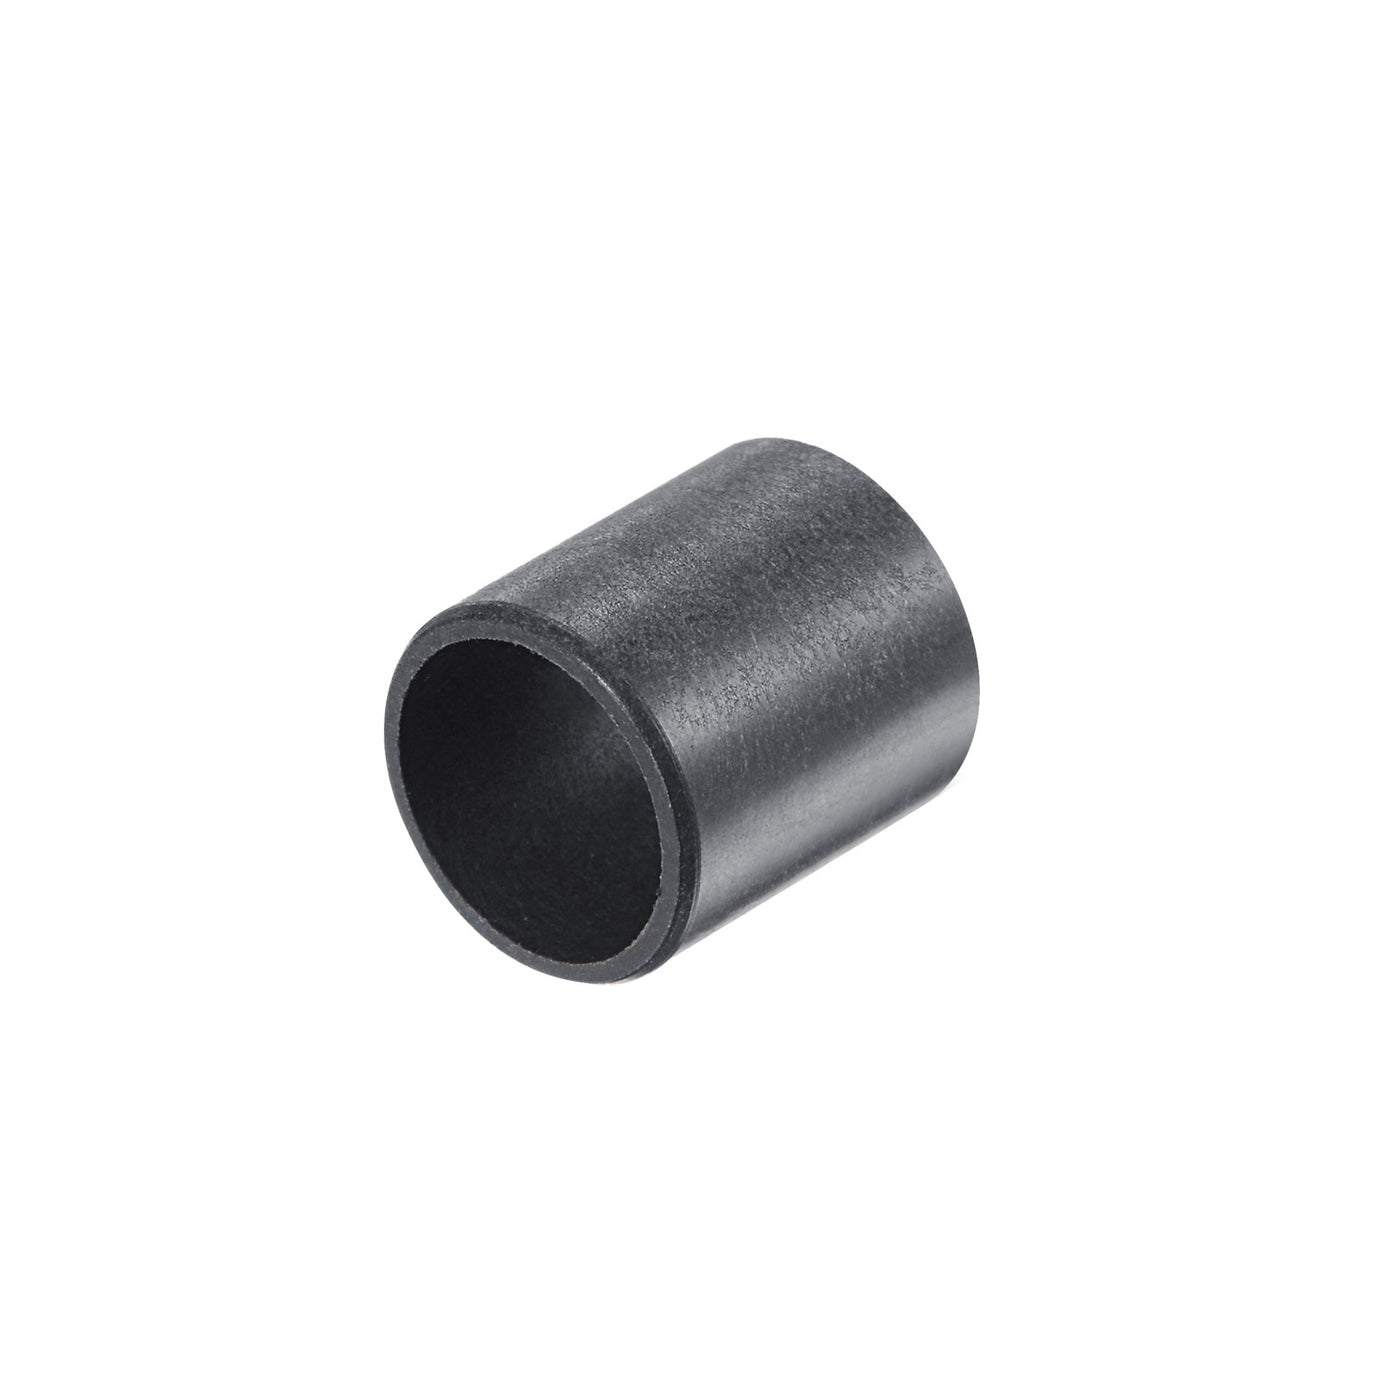 uxcell Uxcell Sleeve Bearings 10mmx12mmx12mm POM Wrapped Oilless Bushings Black